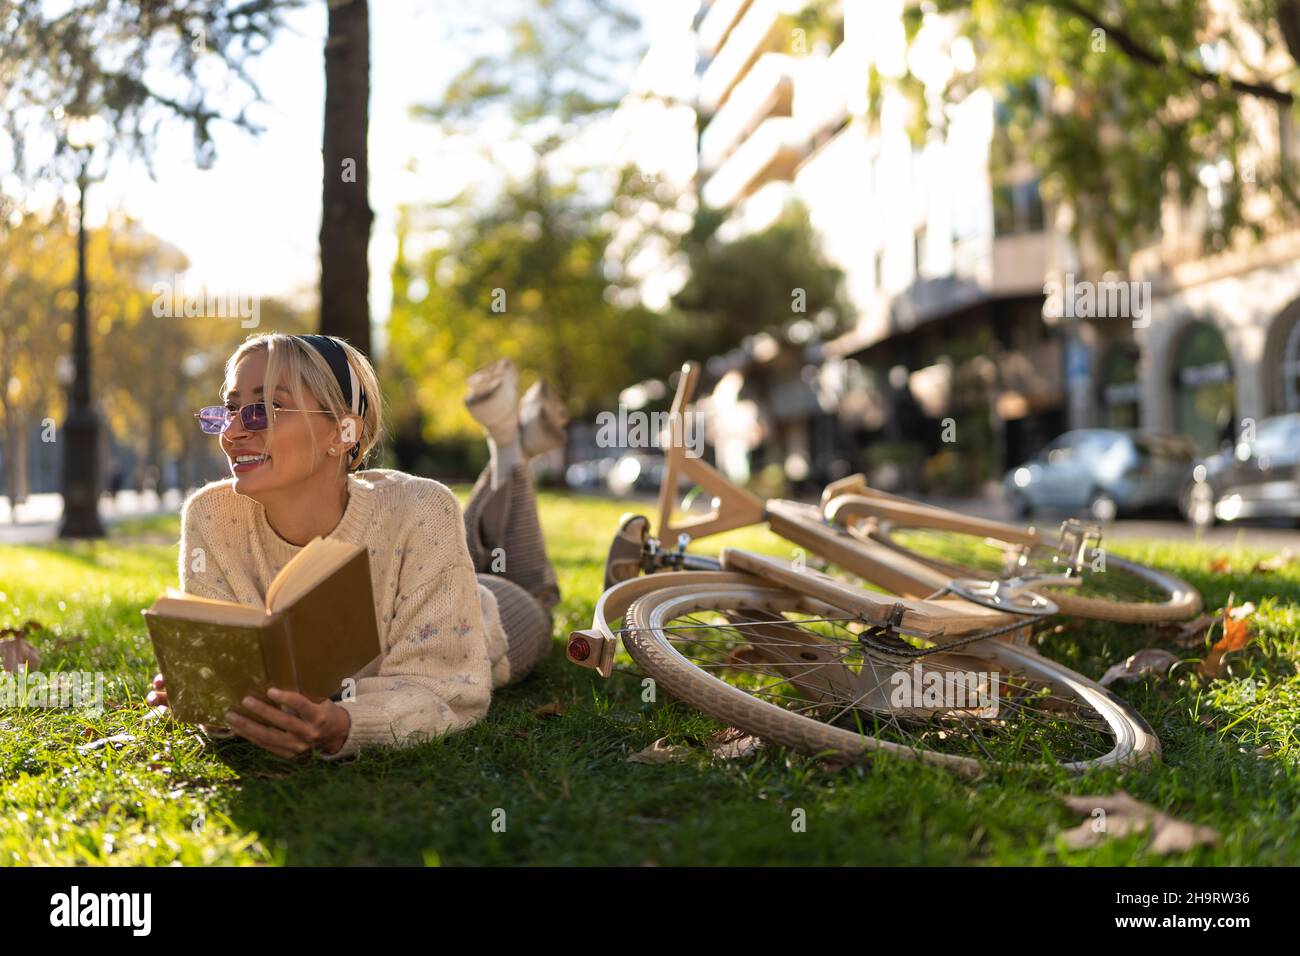 Positive female in sunglasses lying on grassy ground near timber bicycle and reading book in park Stock Photo